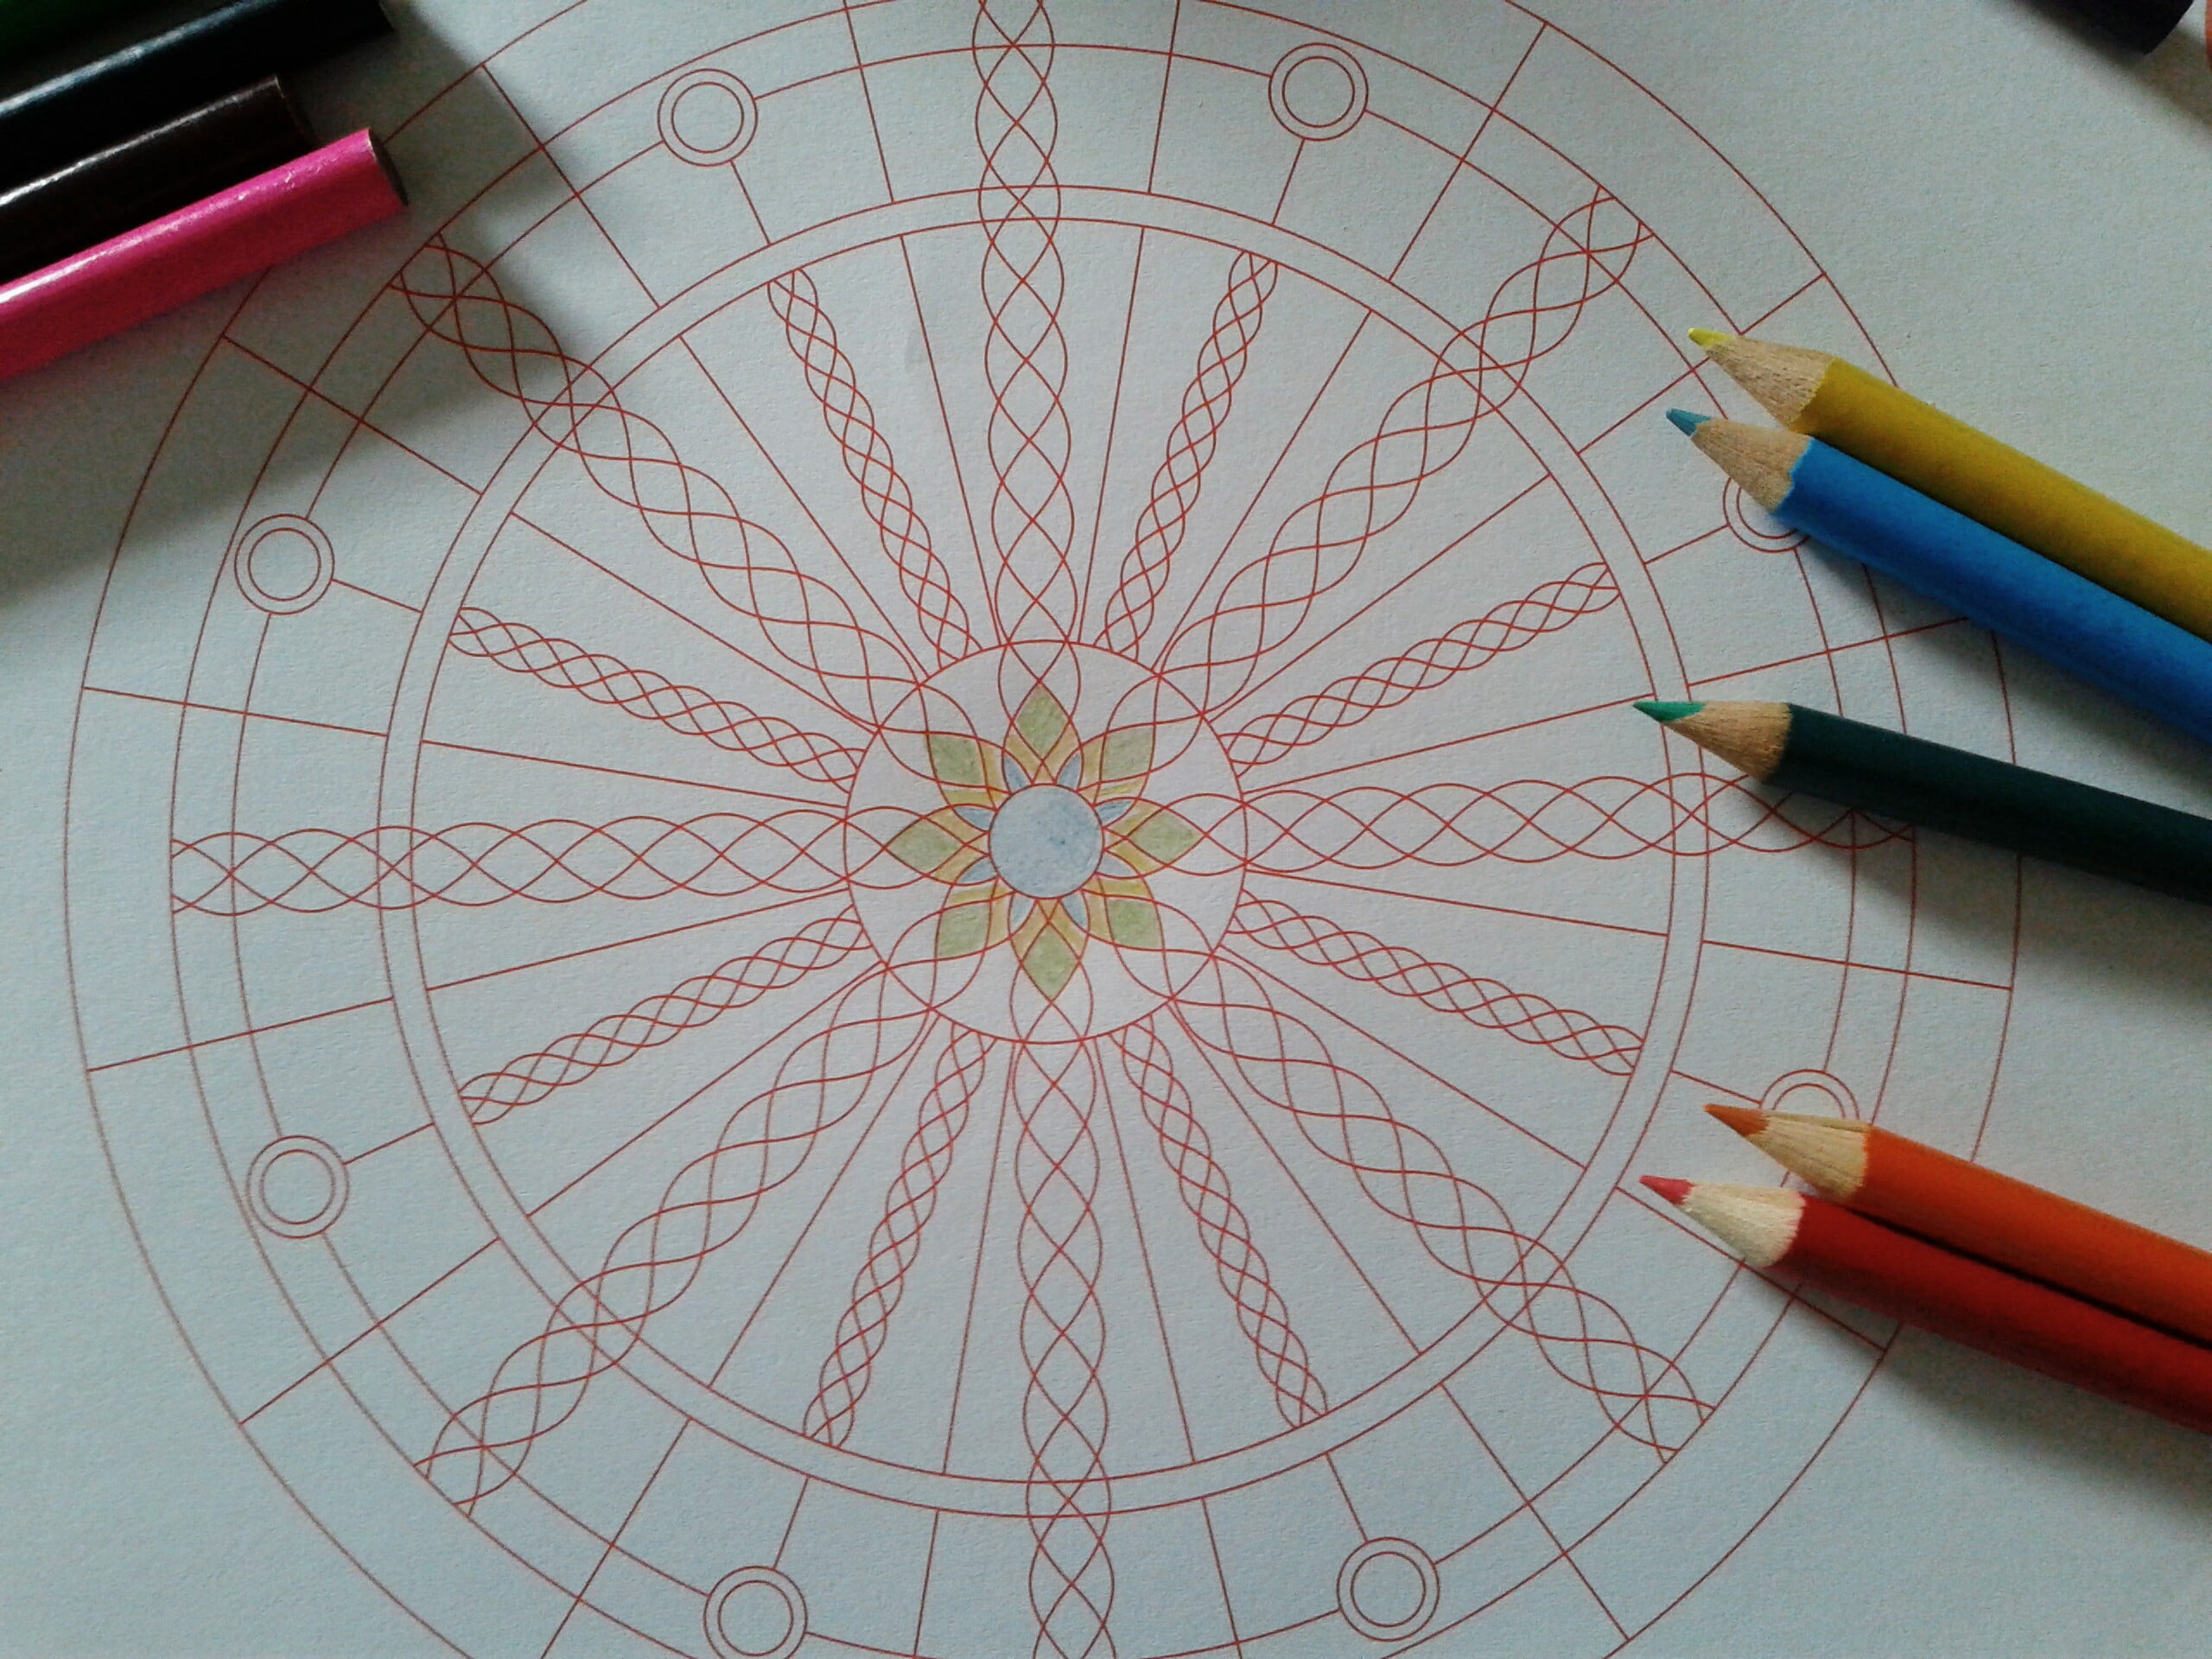 How to Draw a Mandala With a Compass 